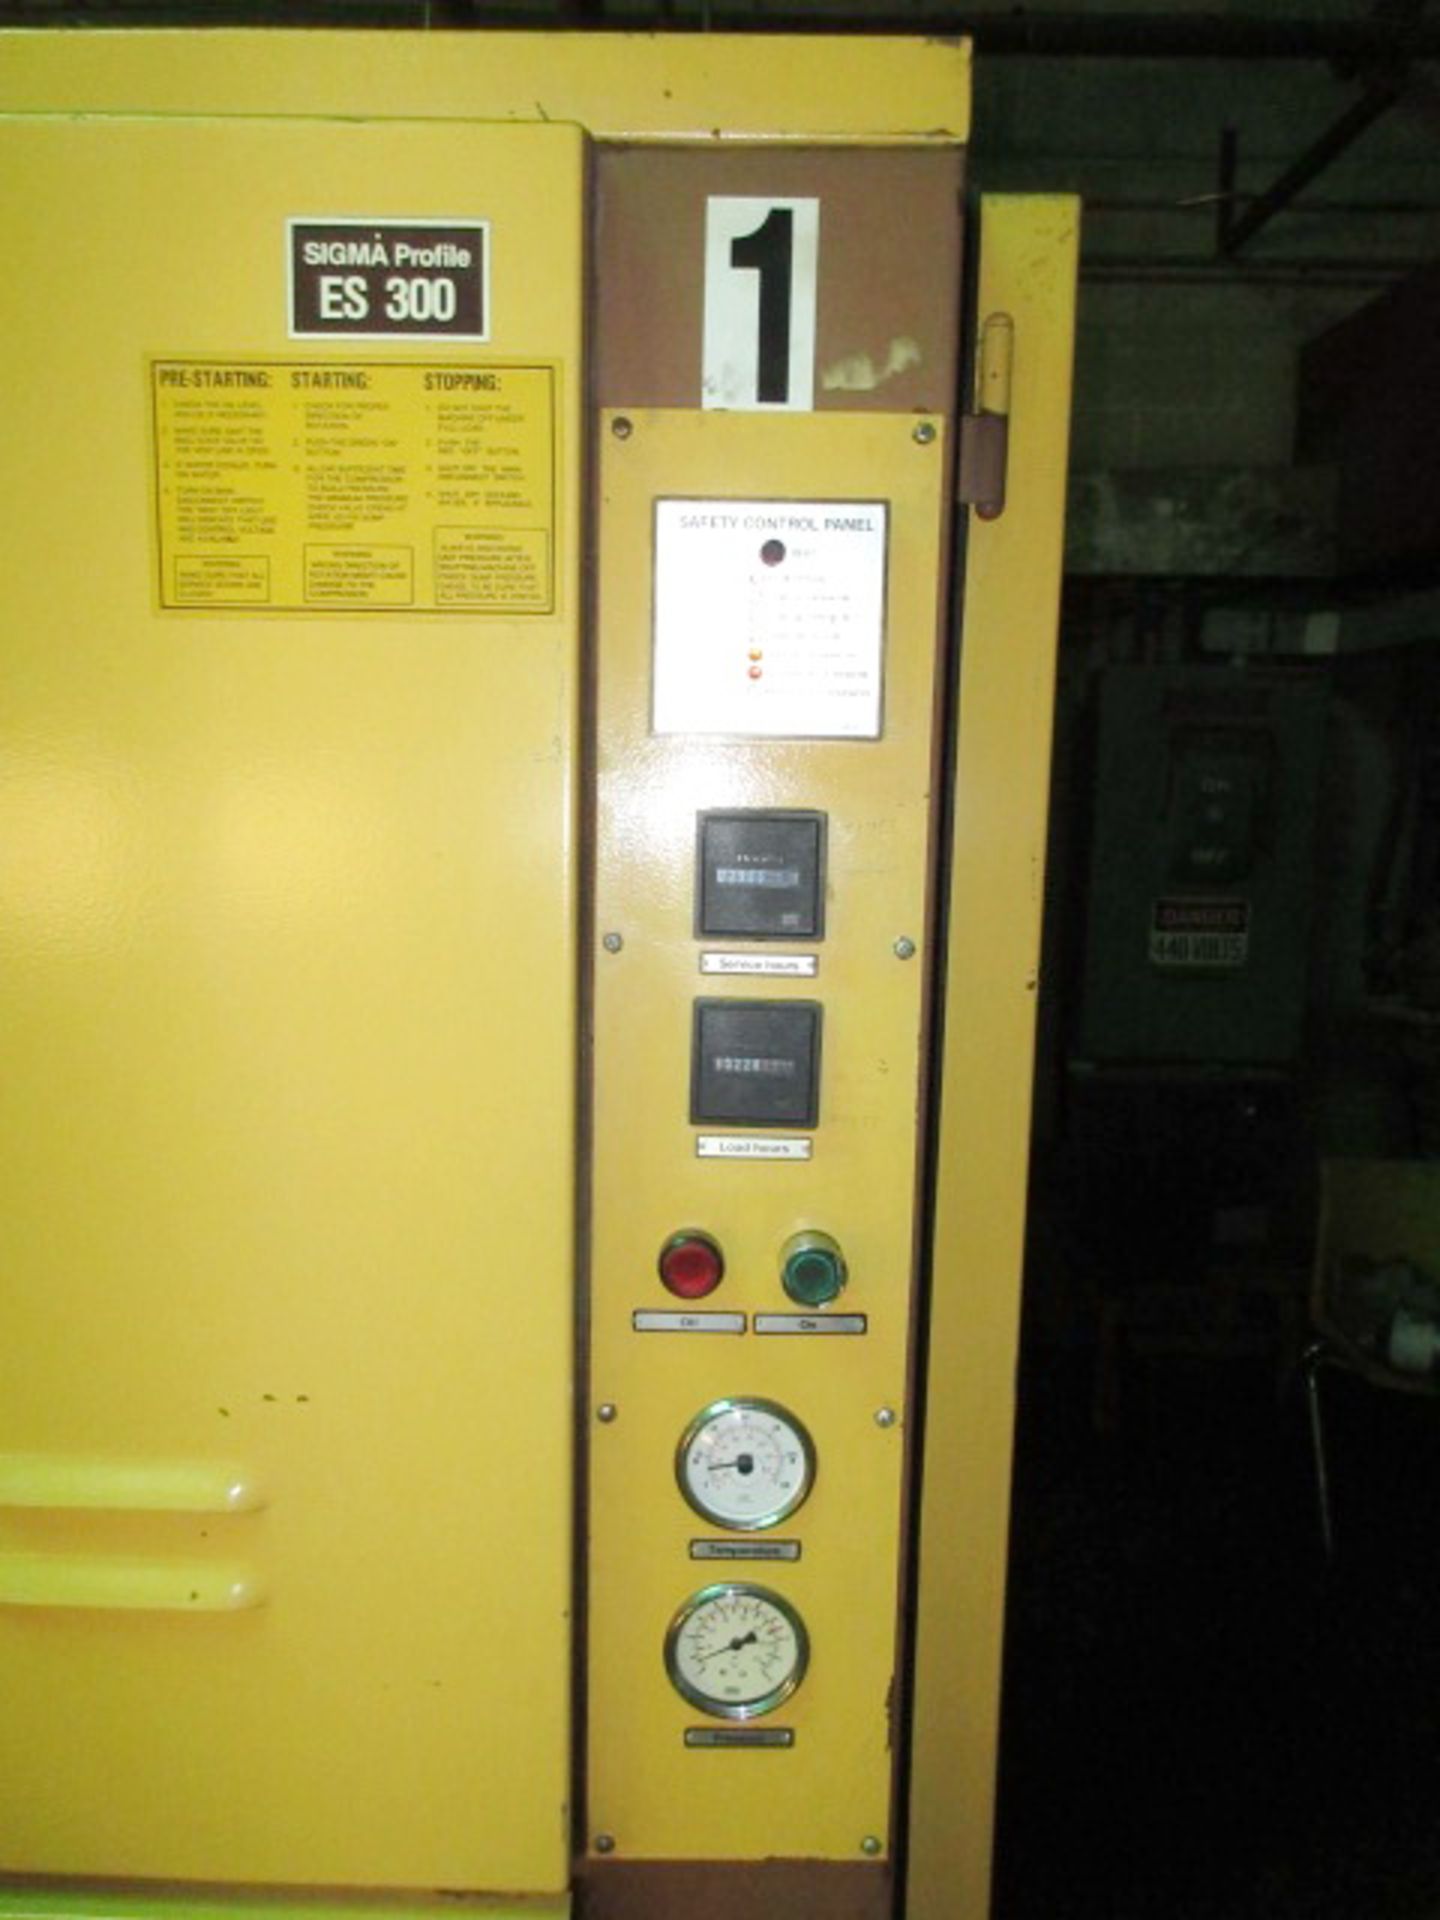 Kaeser ES 300 Sigma Profile Rotary Screw Air Compressor, (1987), 160 KW motor, service/load hrs. - Image 4 of 8